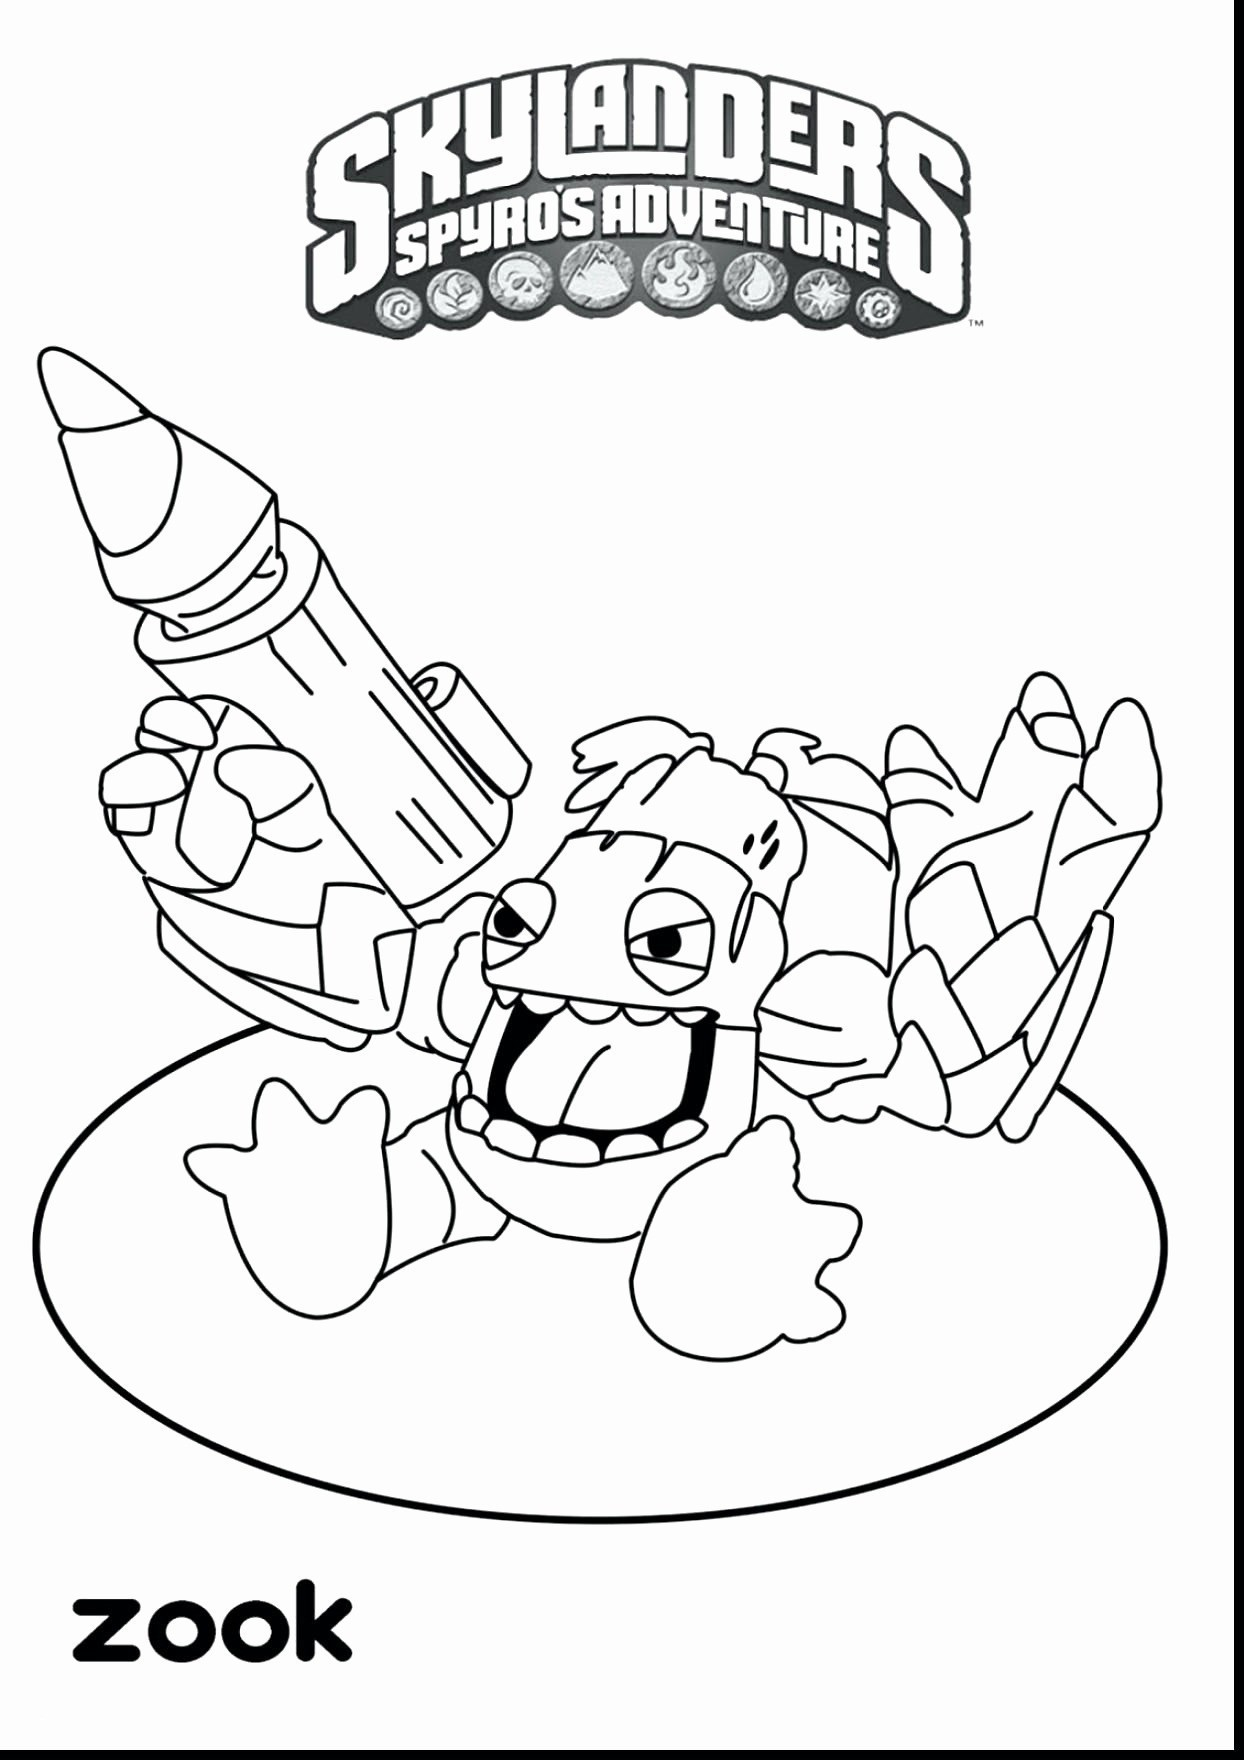 Saraswati Coloring Pages Coloring Extraordinary Instrument Coloring Pages Picture Ideas